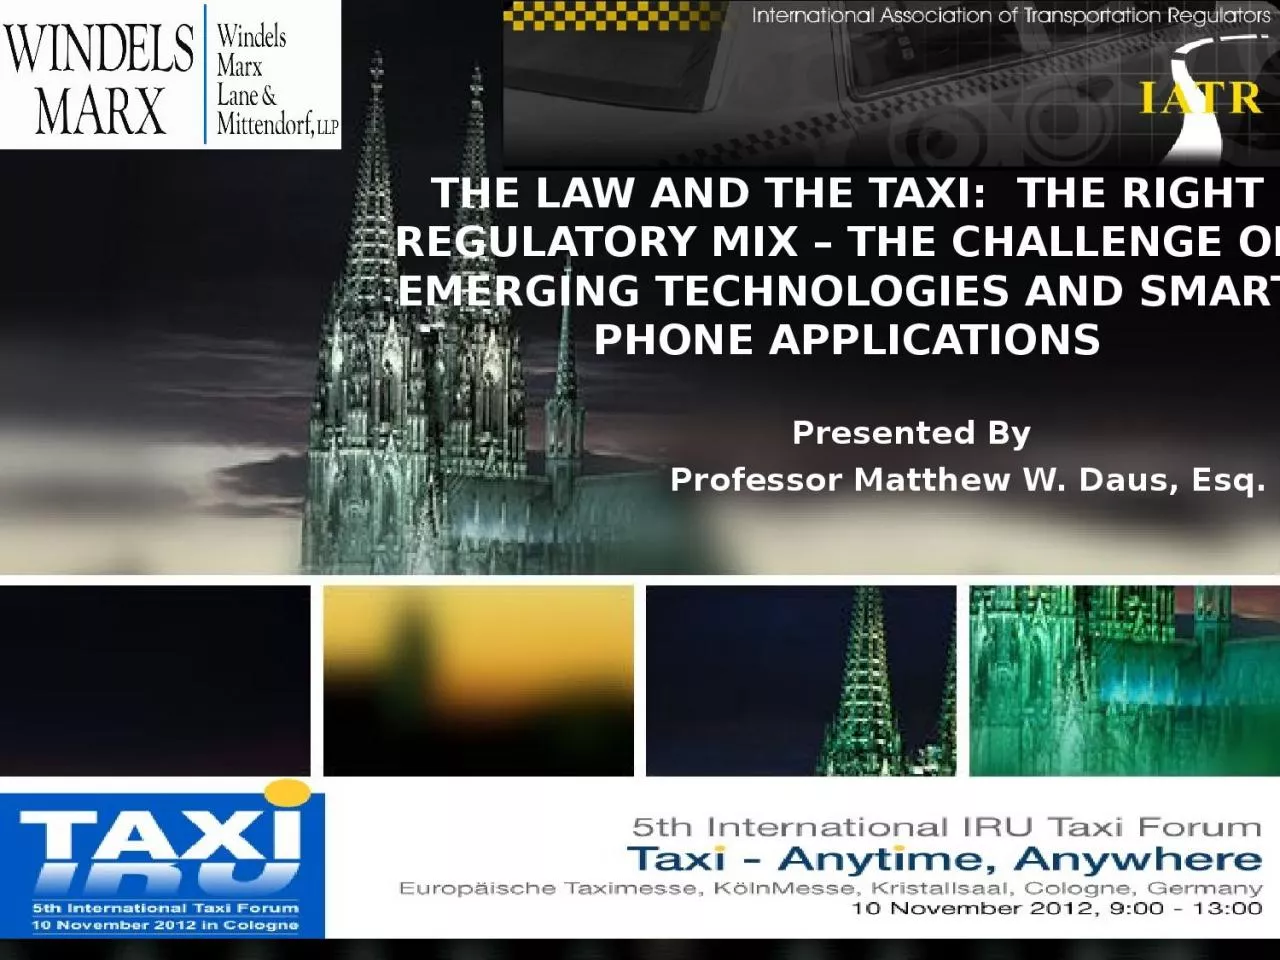 THE LAW AND THE TAXI:  THE RIGHT REGULATORY MIX – THE CHALLENGE OF EMERGING TECHNOLOGIES